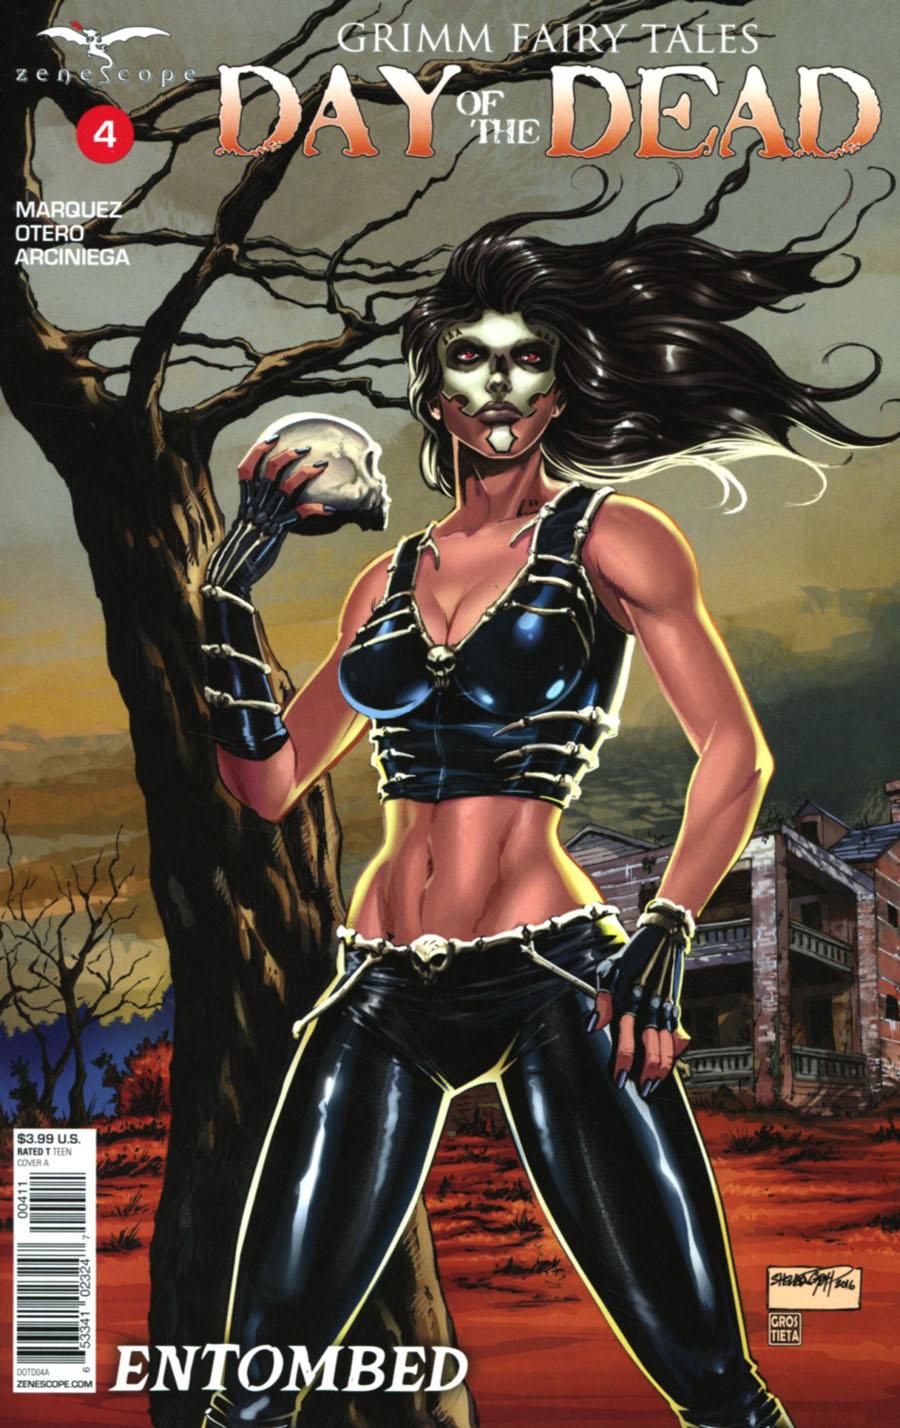 Grimm Fairy Tales Presents Day Of The Dead Vol. 1 #4